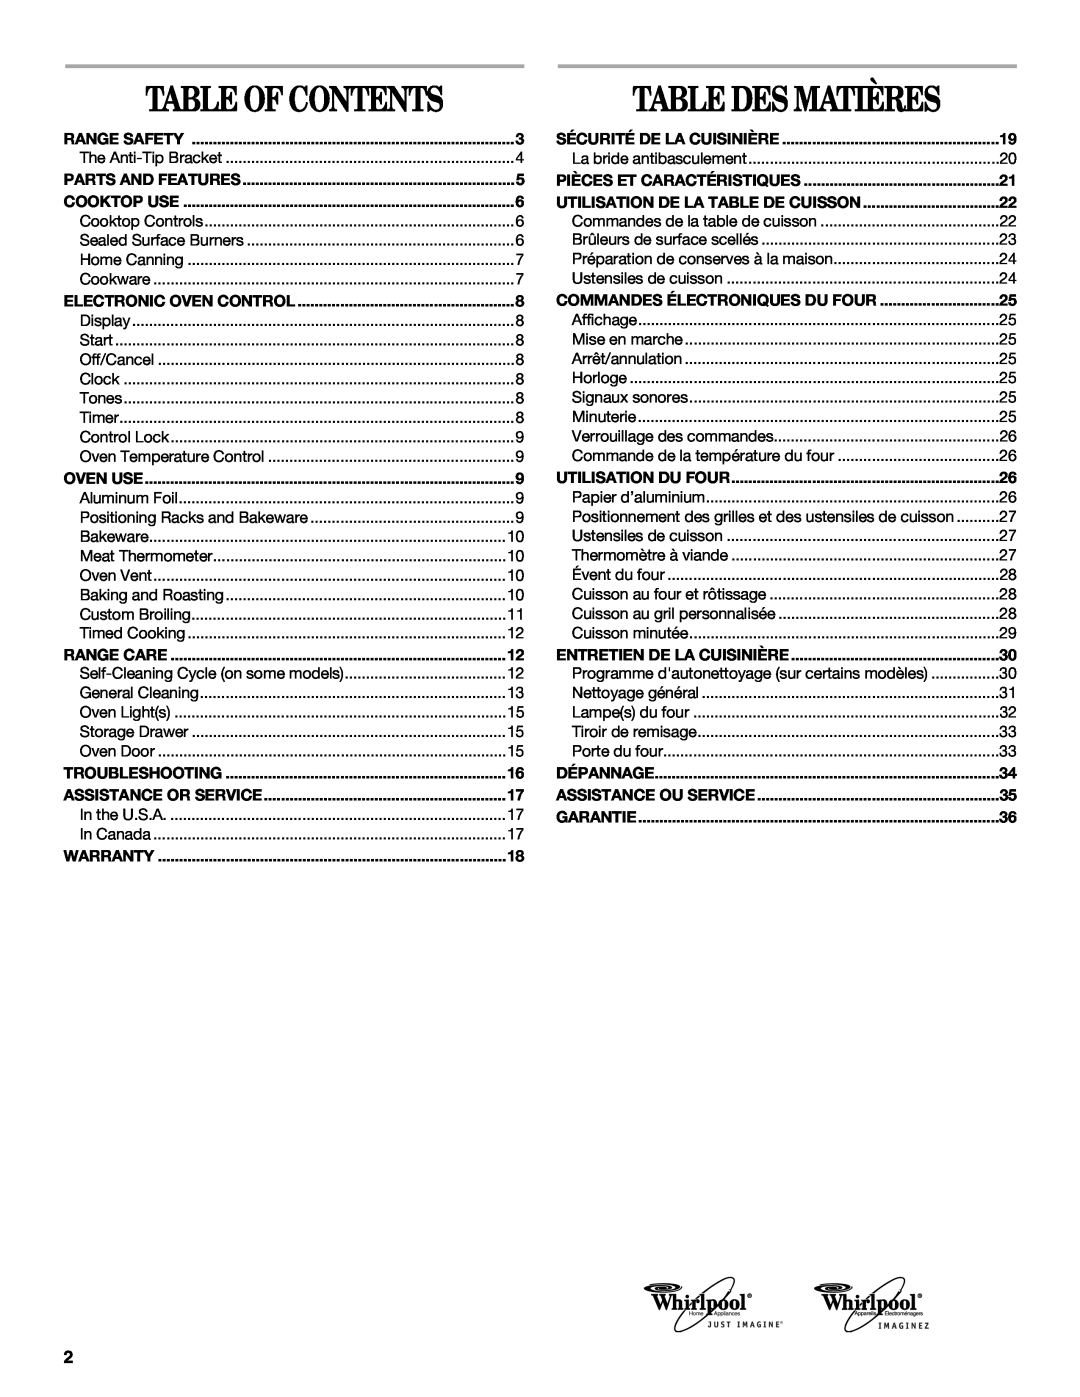 Whirlpool W10086240 manual Table Des Matières, Table Of Contents 